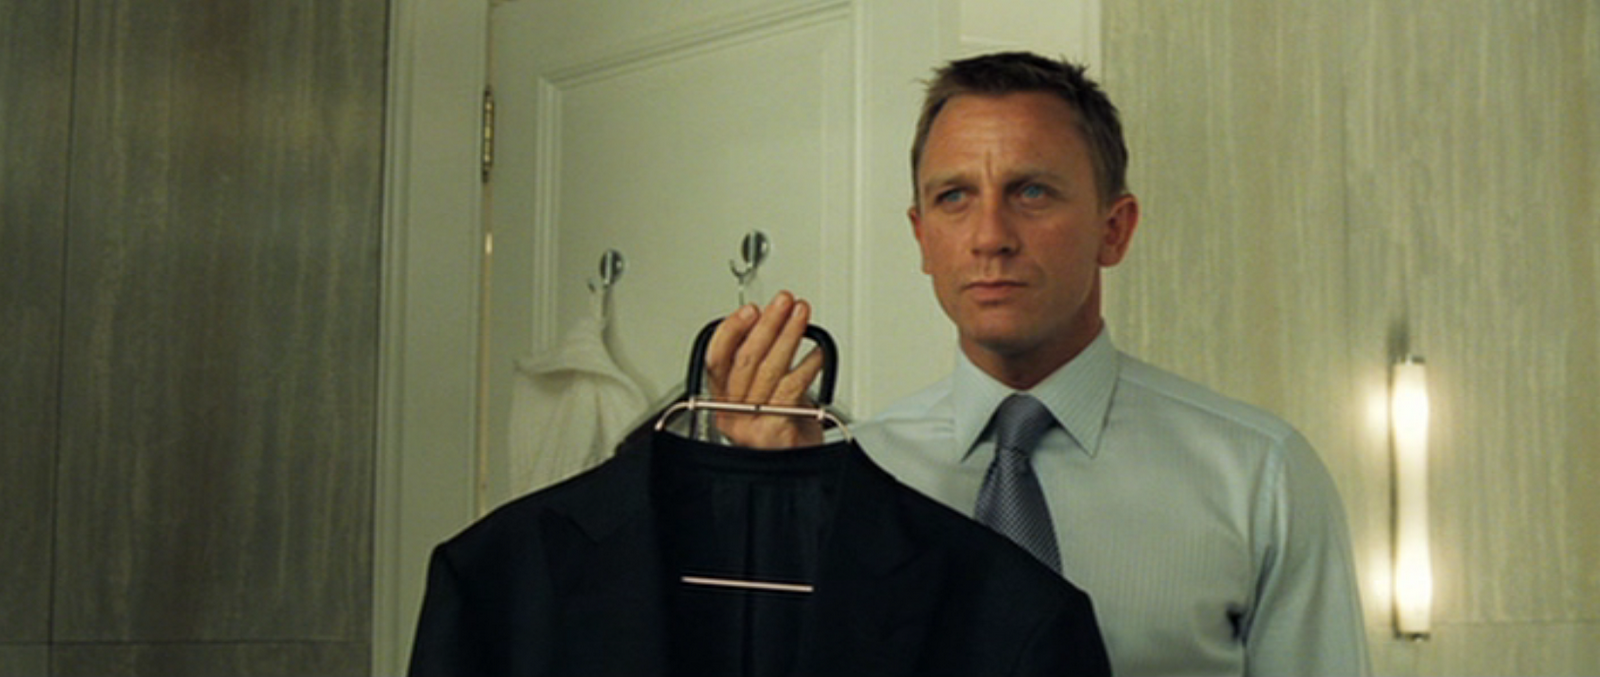 The Casino Royale Dinner Jacket –The Suits of James Bond